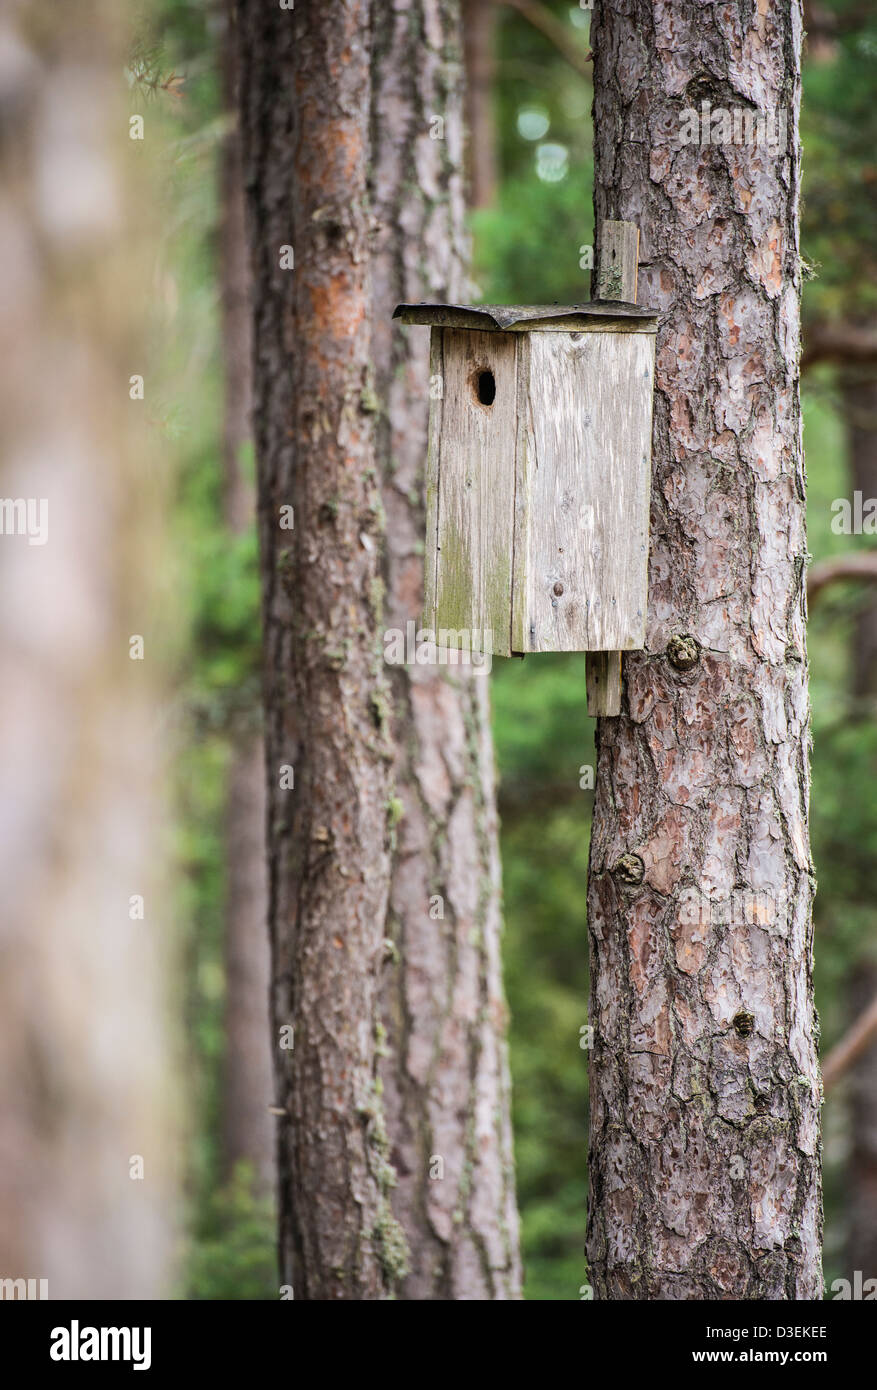 Wooden birdhouse on pine tree trunk in forest Stock Photo